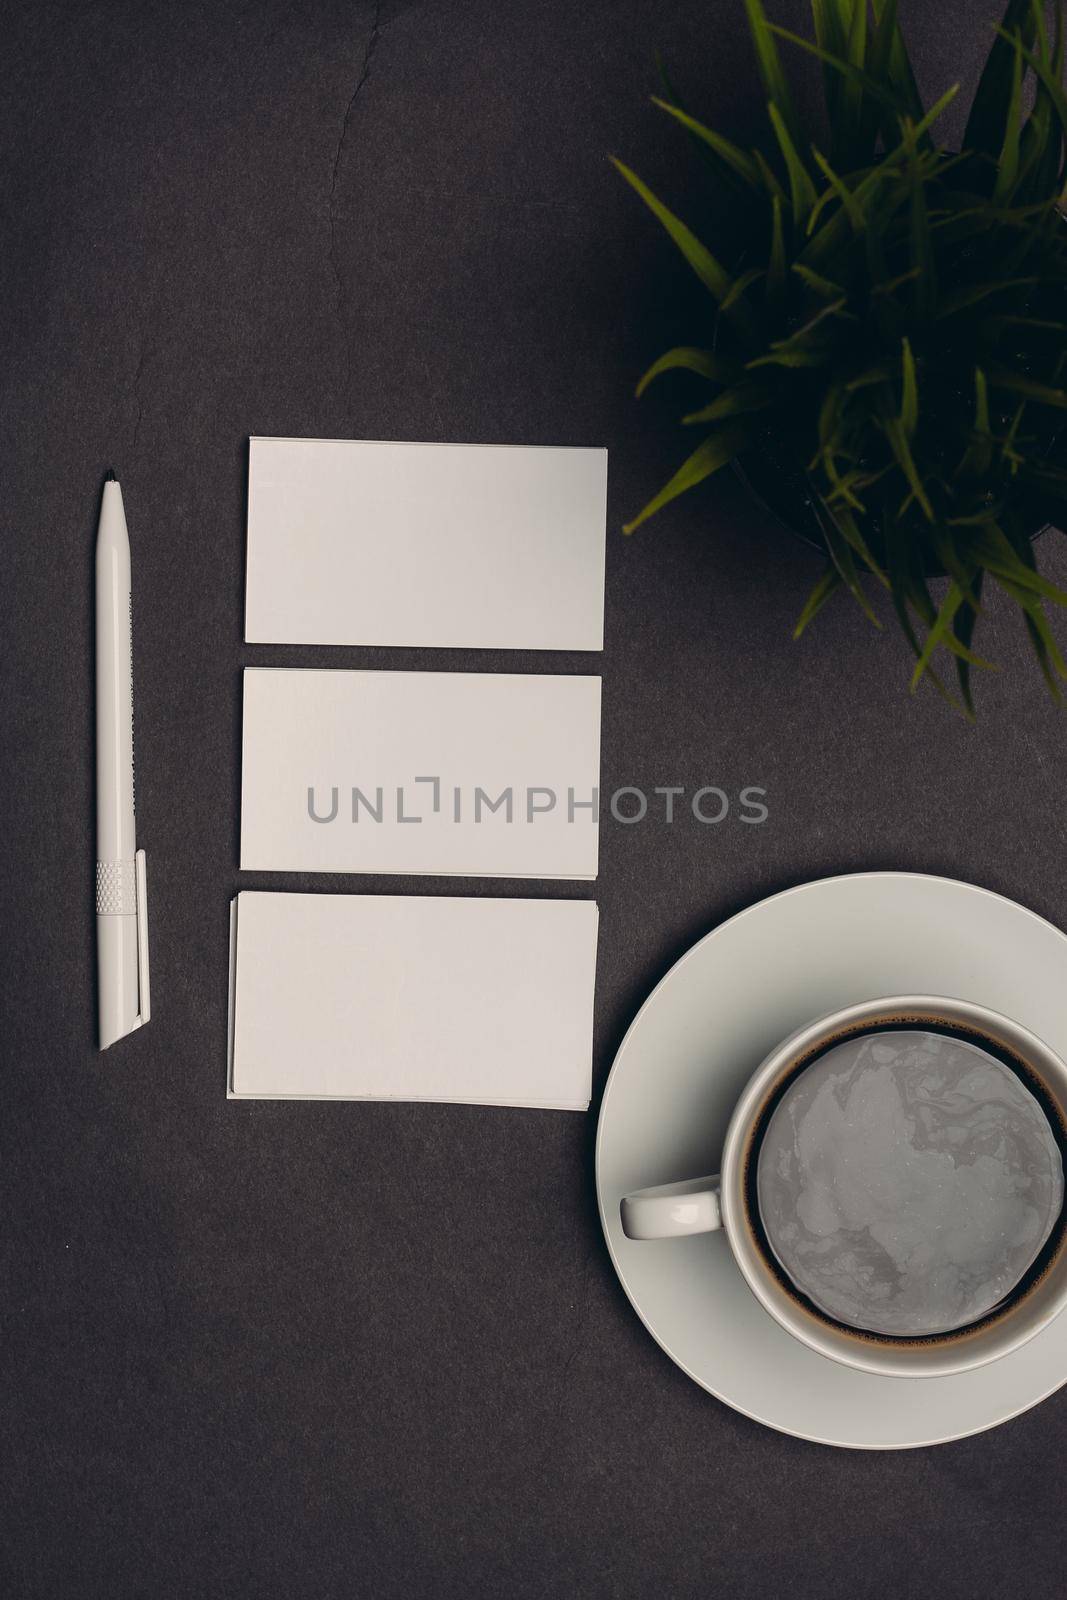 white business cards on dark table and office finance. High quality photo